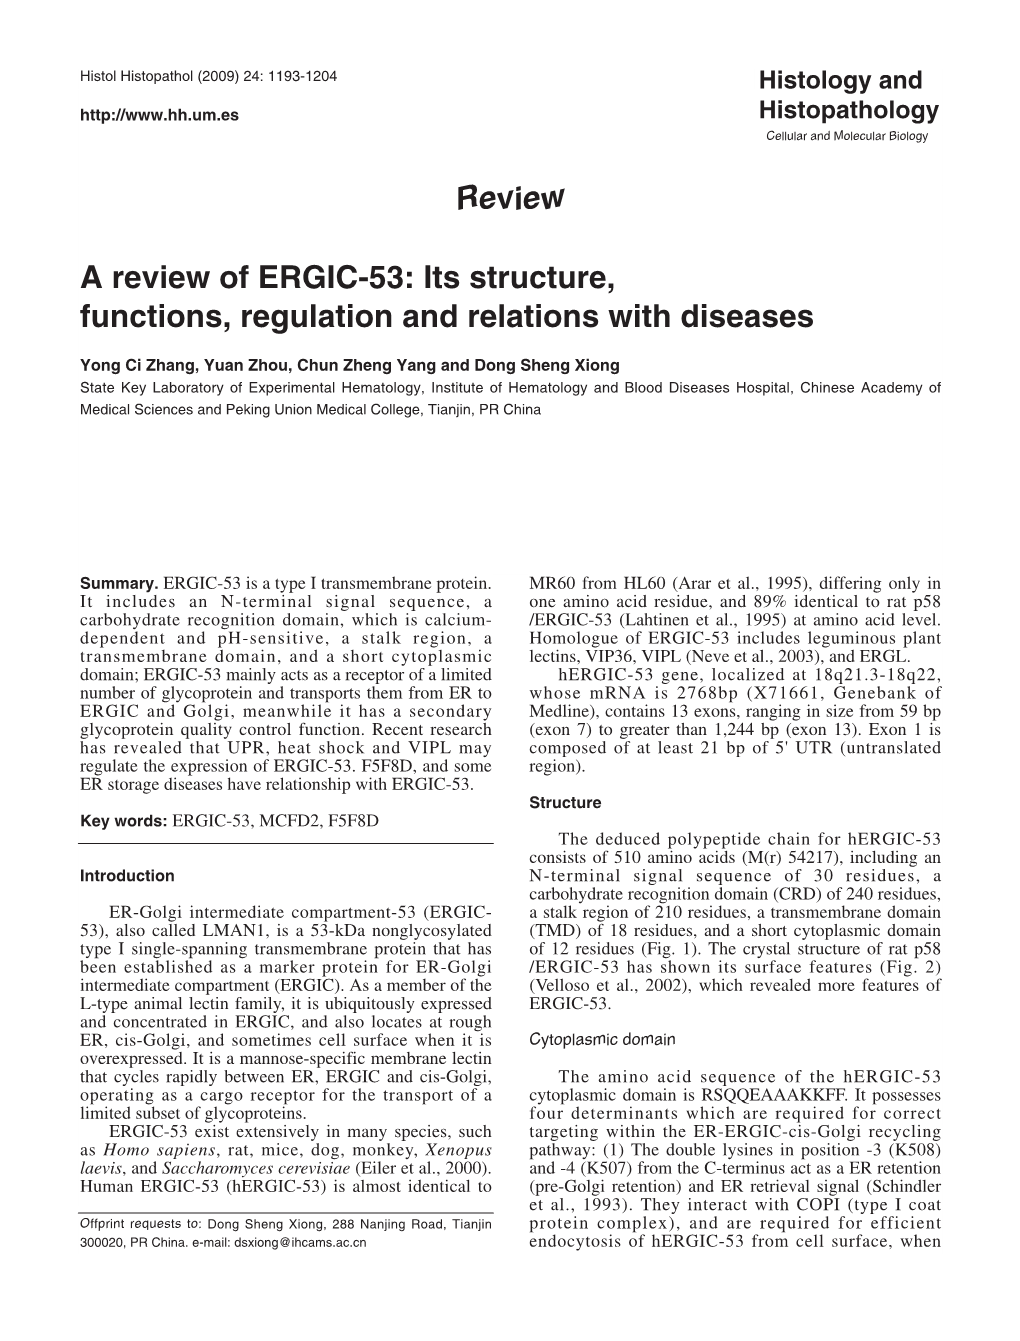 Review a Review of ERGIC-53: Its Structure, Functions, Regulation and Relations with Diseases